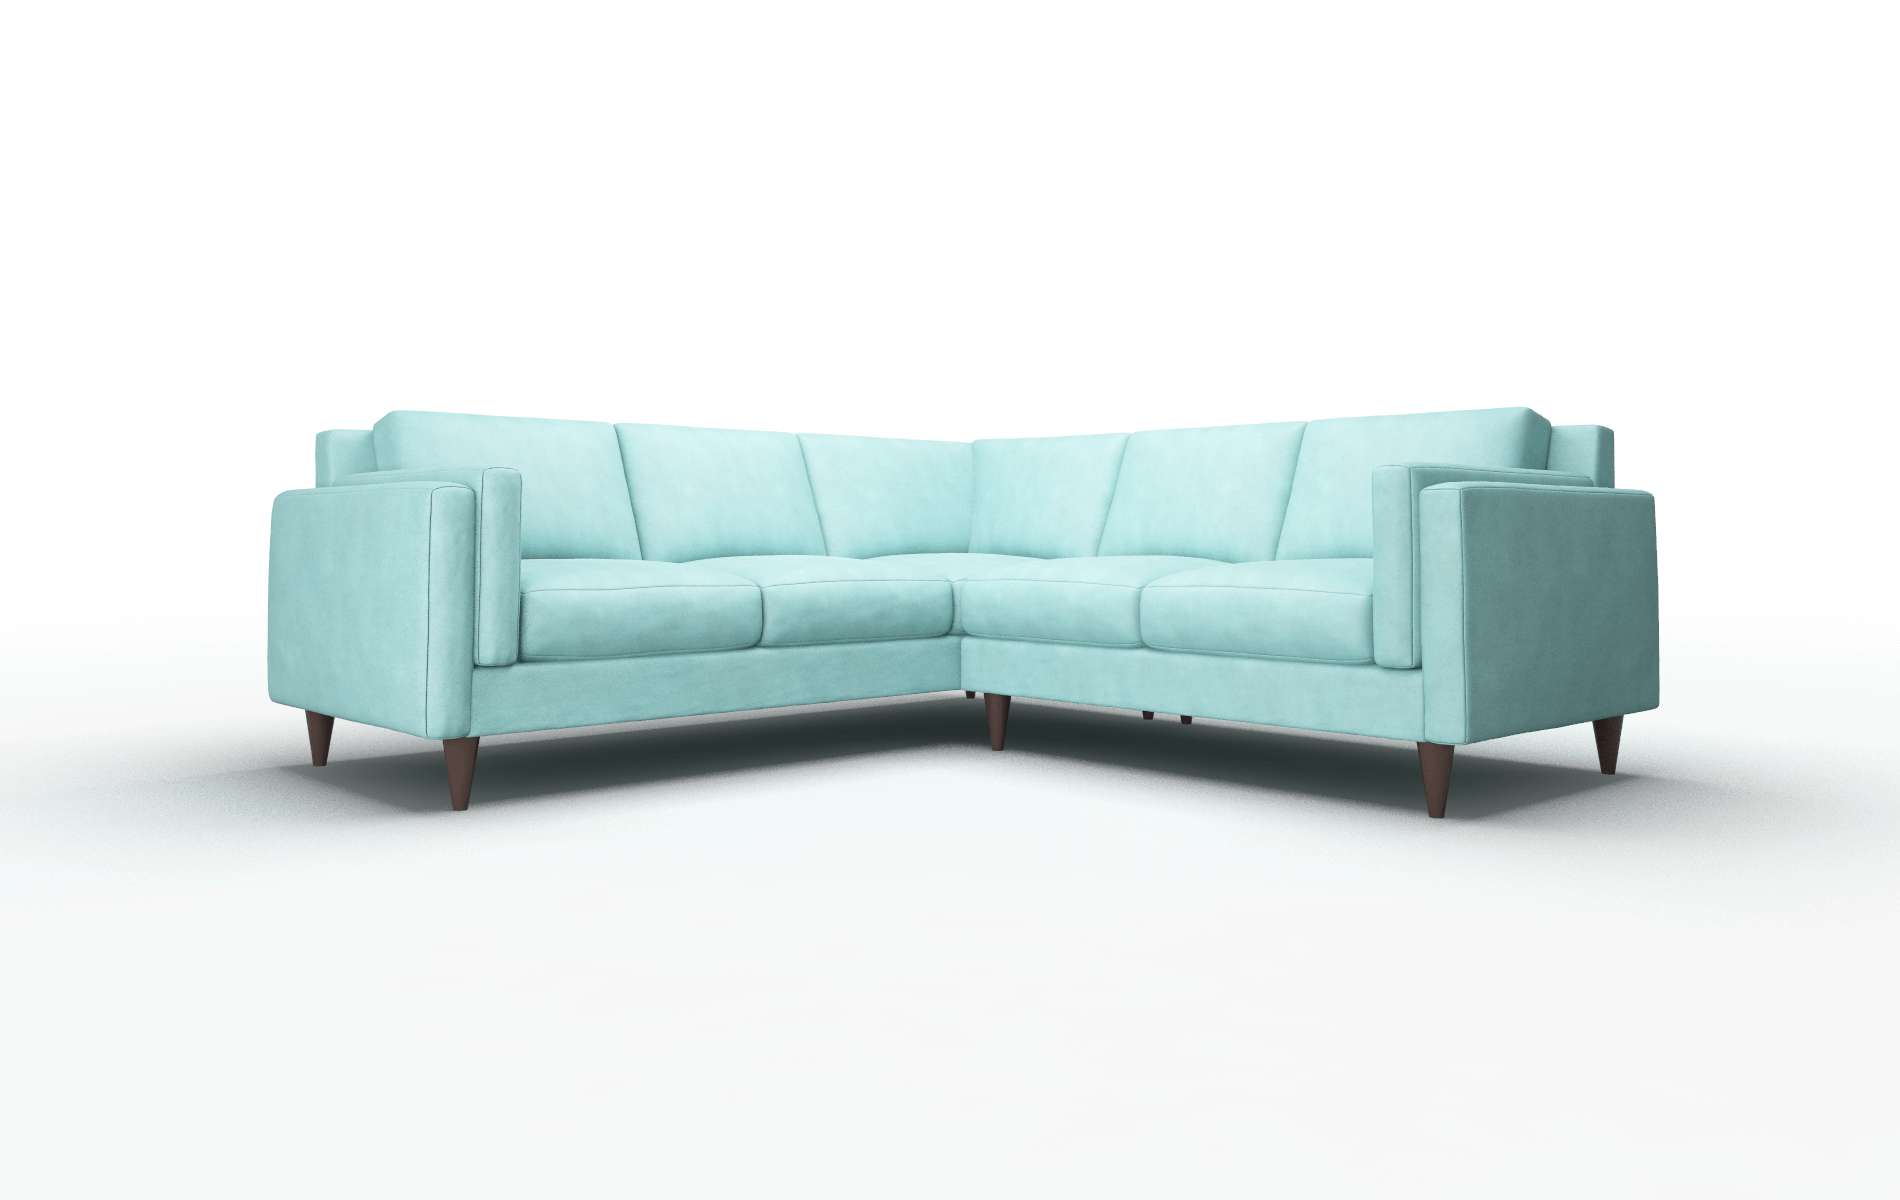 Helsinki Curious Turquoise Sectional espresso legs 1